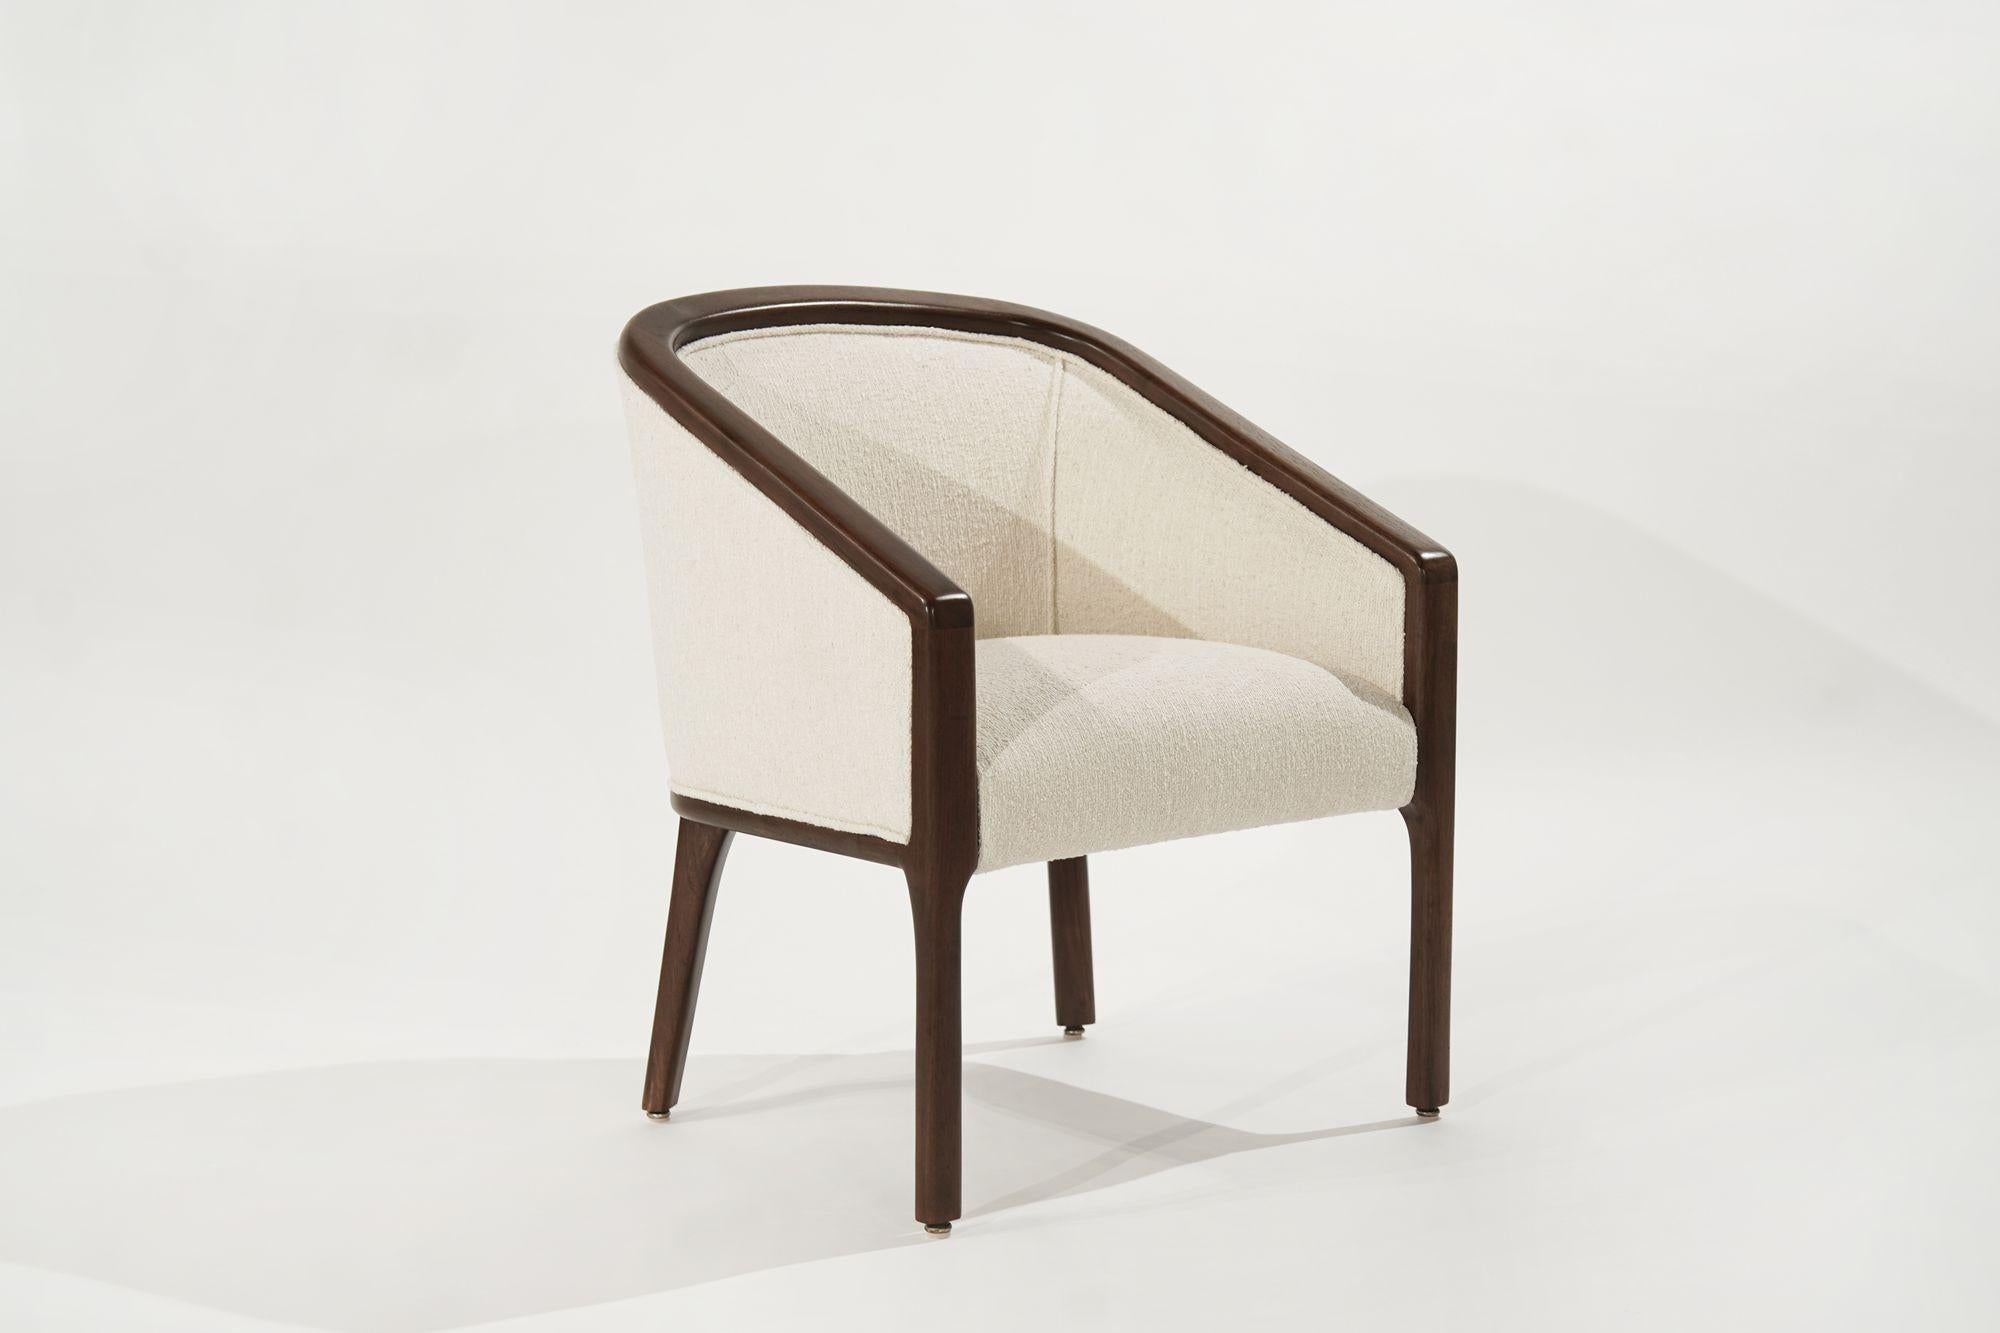 A beautiful lounge chair original from Denmark, circa 1960-1969. Features completely exposed teak framework reupholstered in off-white linen.
 
Other designers from this period include Paul McCobb, Vladimir Kagan, Hans Wegner, Gio Ponti, and T.H.